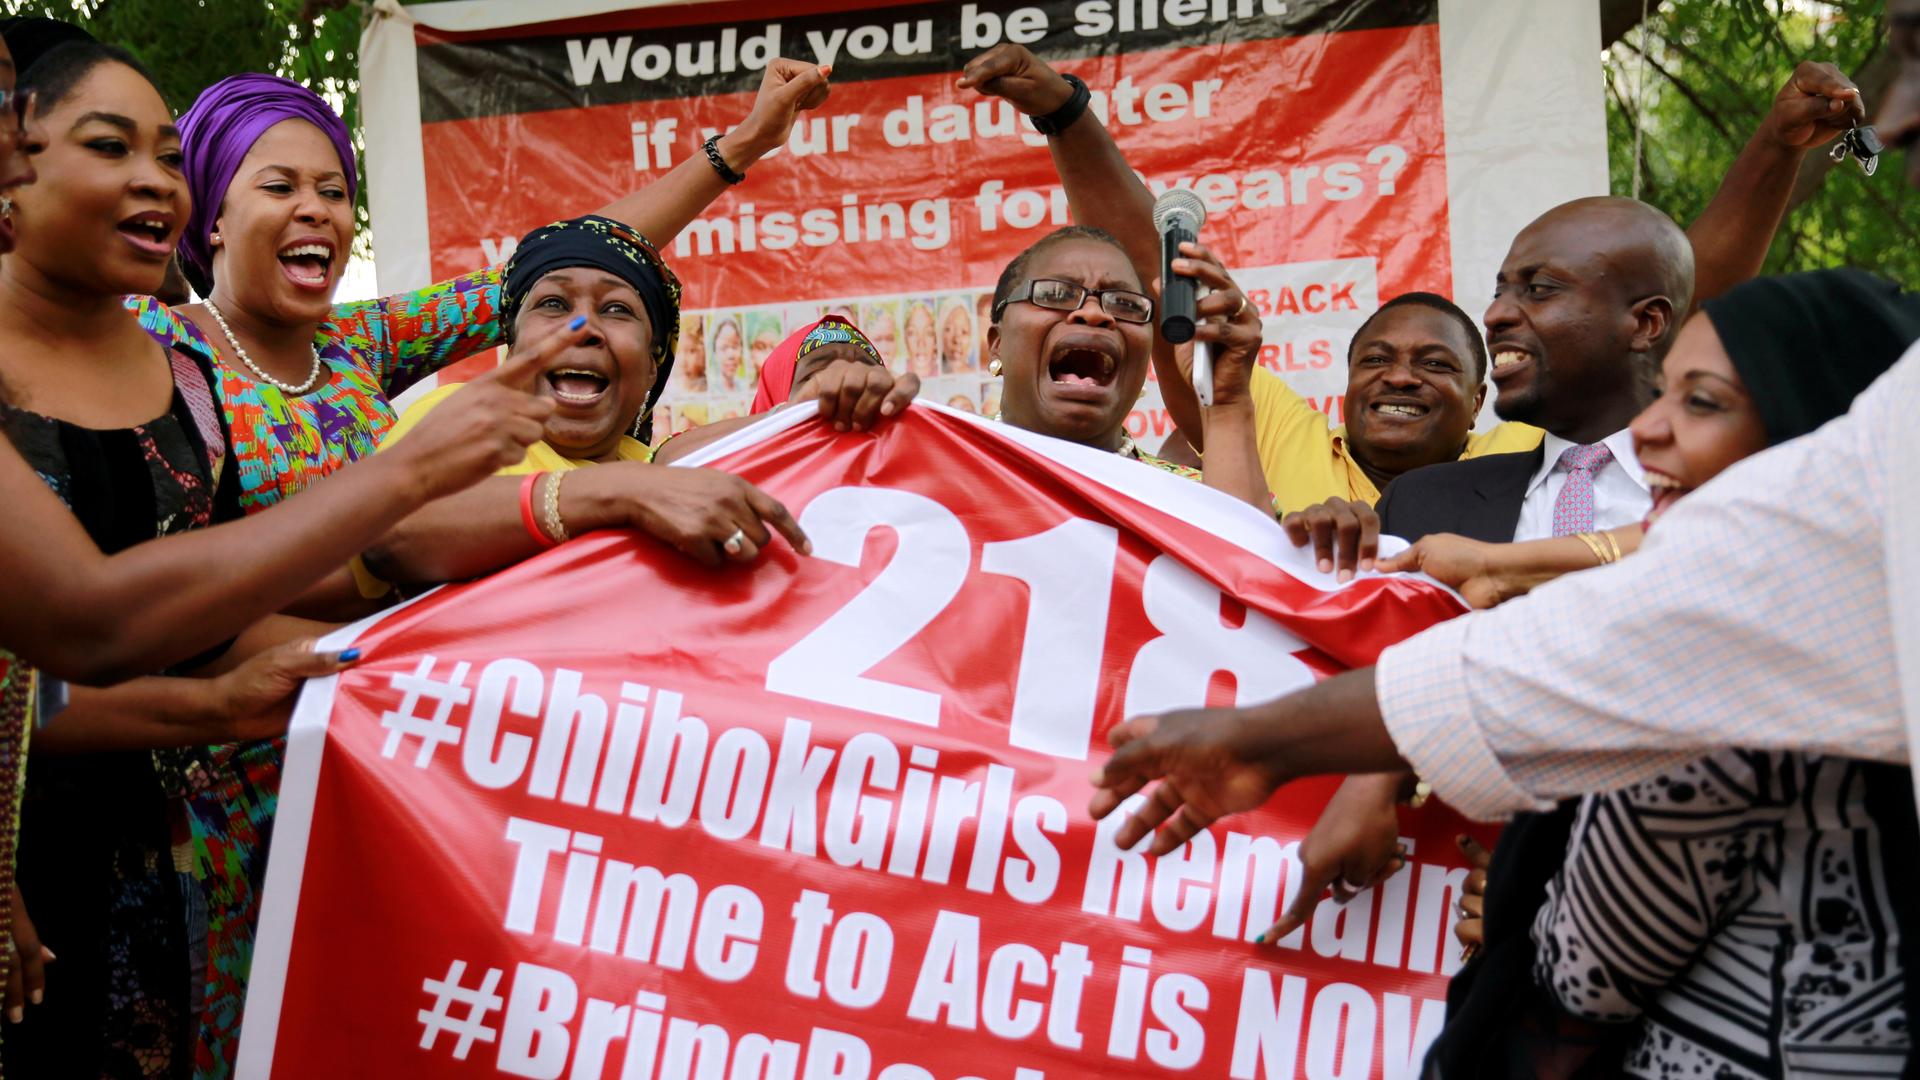 Members of the #BringBackOurGirls campaign react on the presentation of a banner referring to the kidnapped Chibok school girls, during a sit-out in Abuja, Nigeria May 18, 2016, 